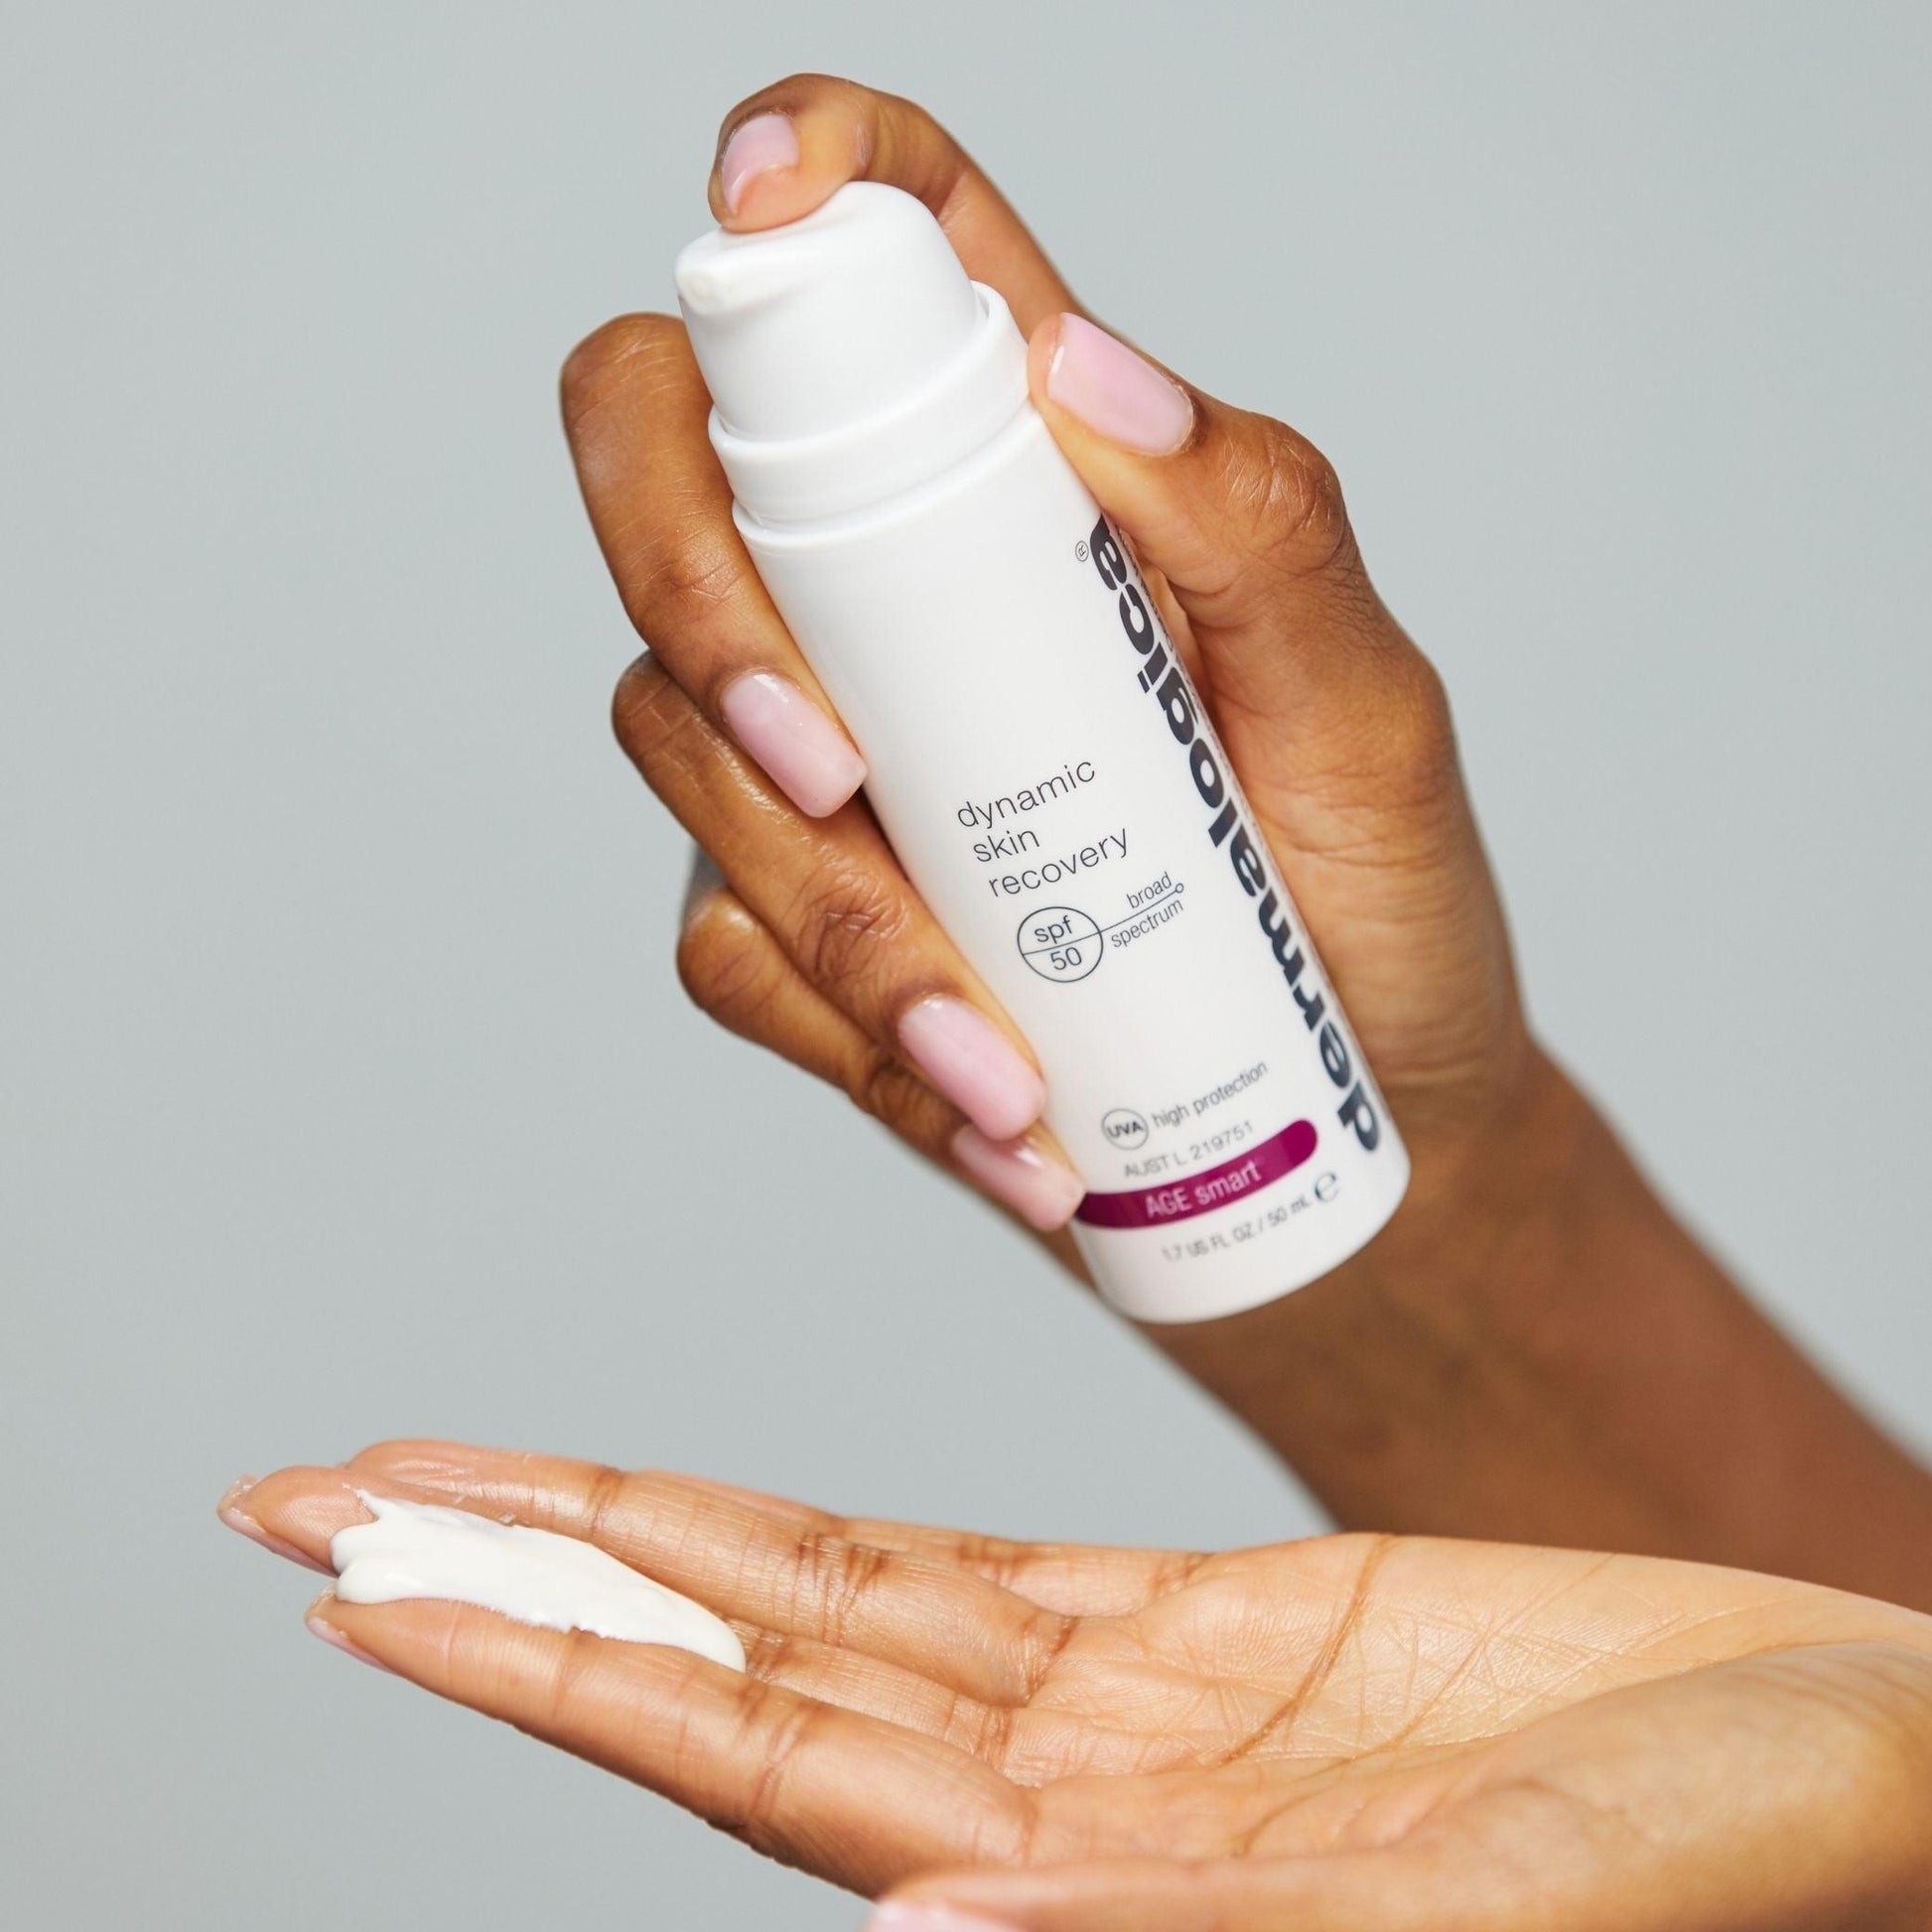 dynamic skin recovery spf50 - Dermalogica Thailand